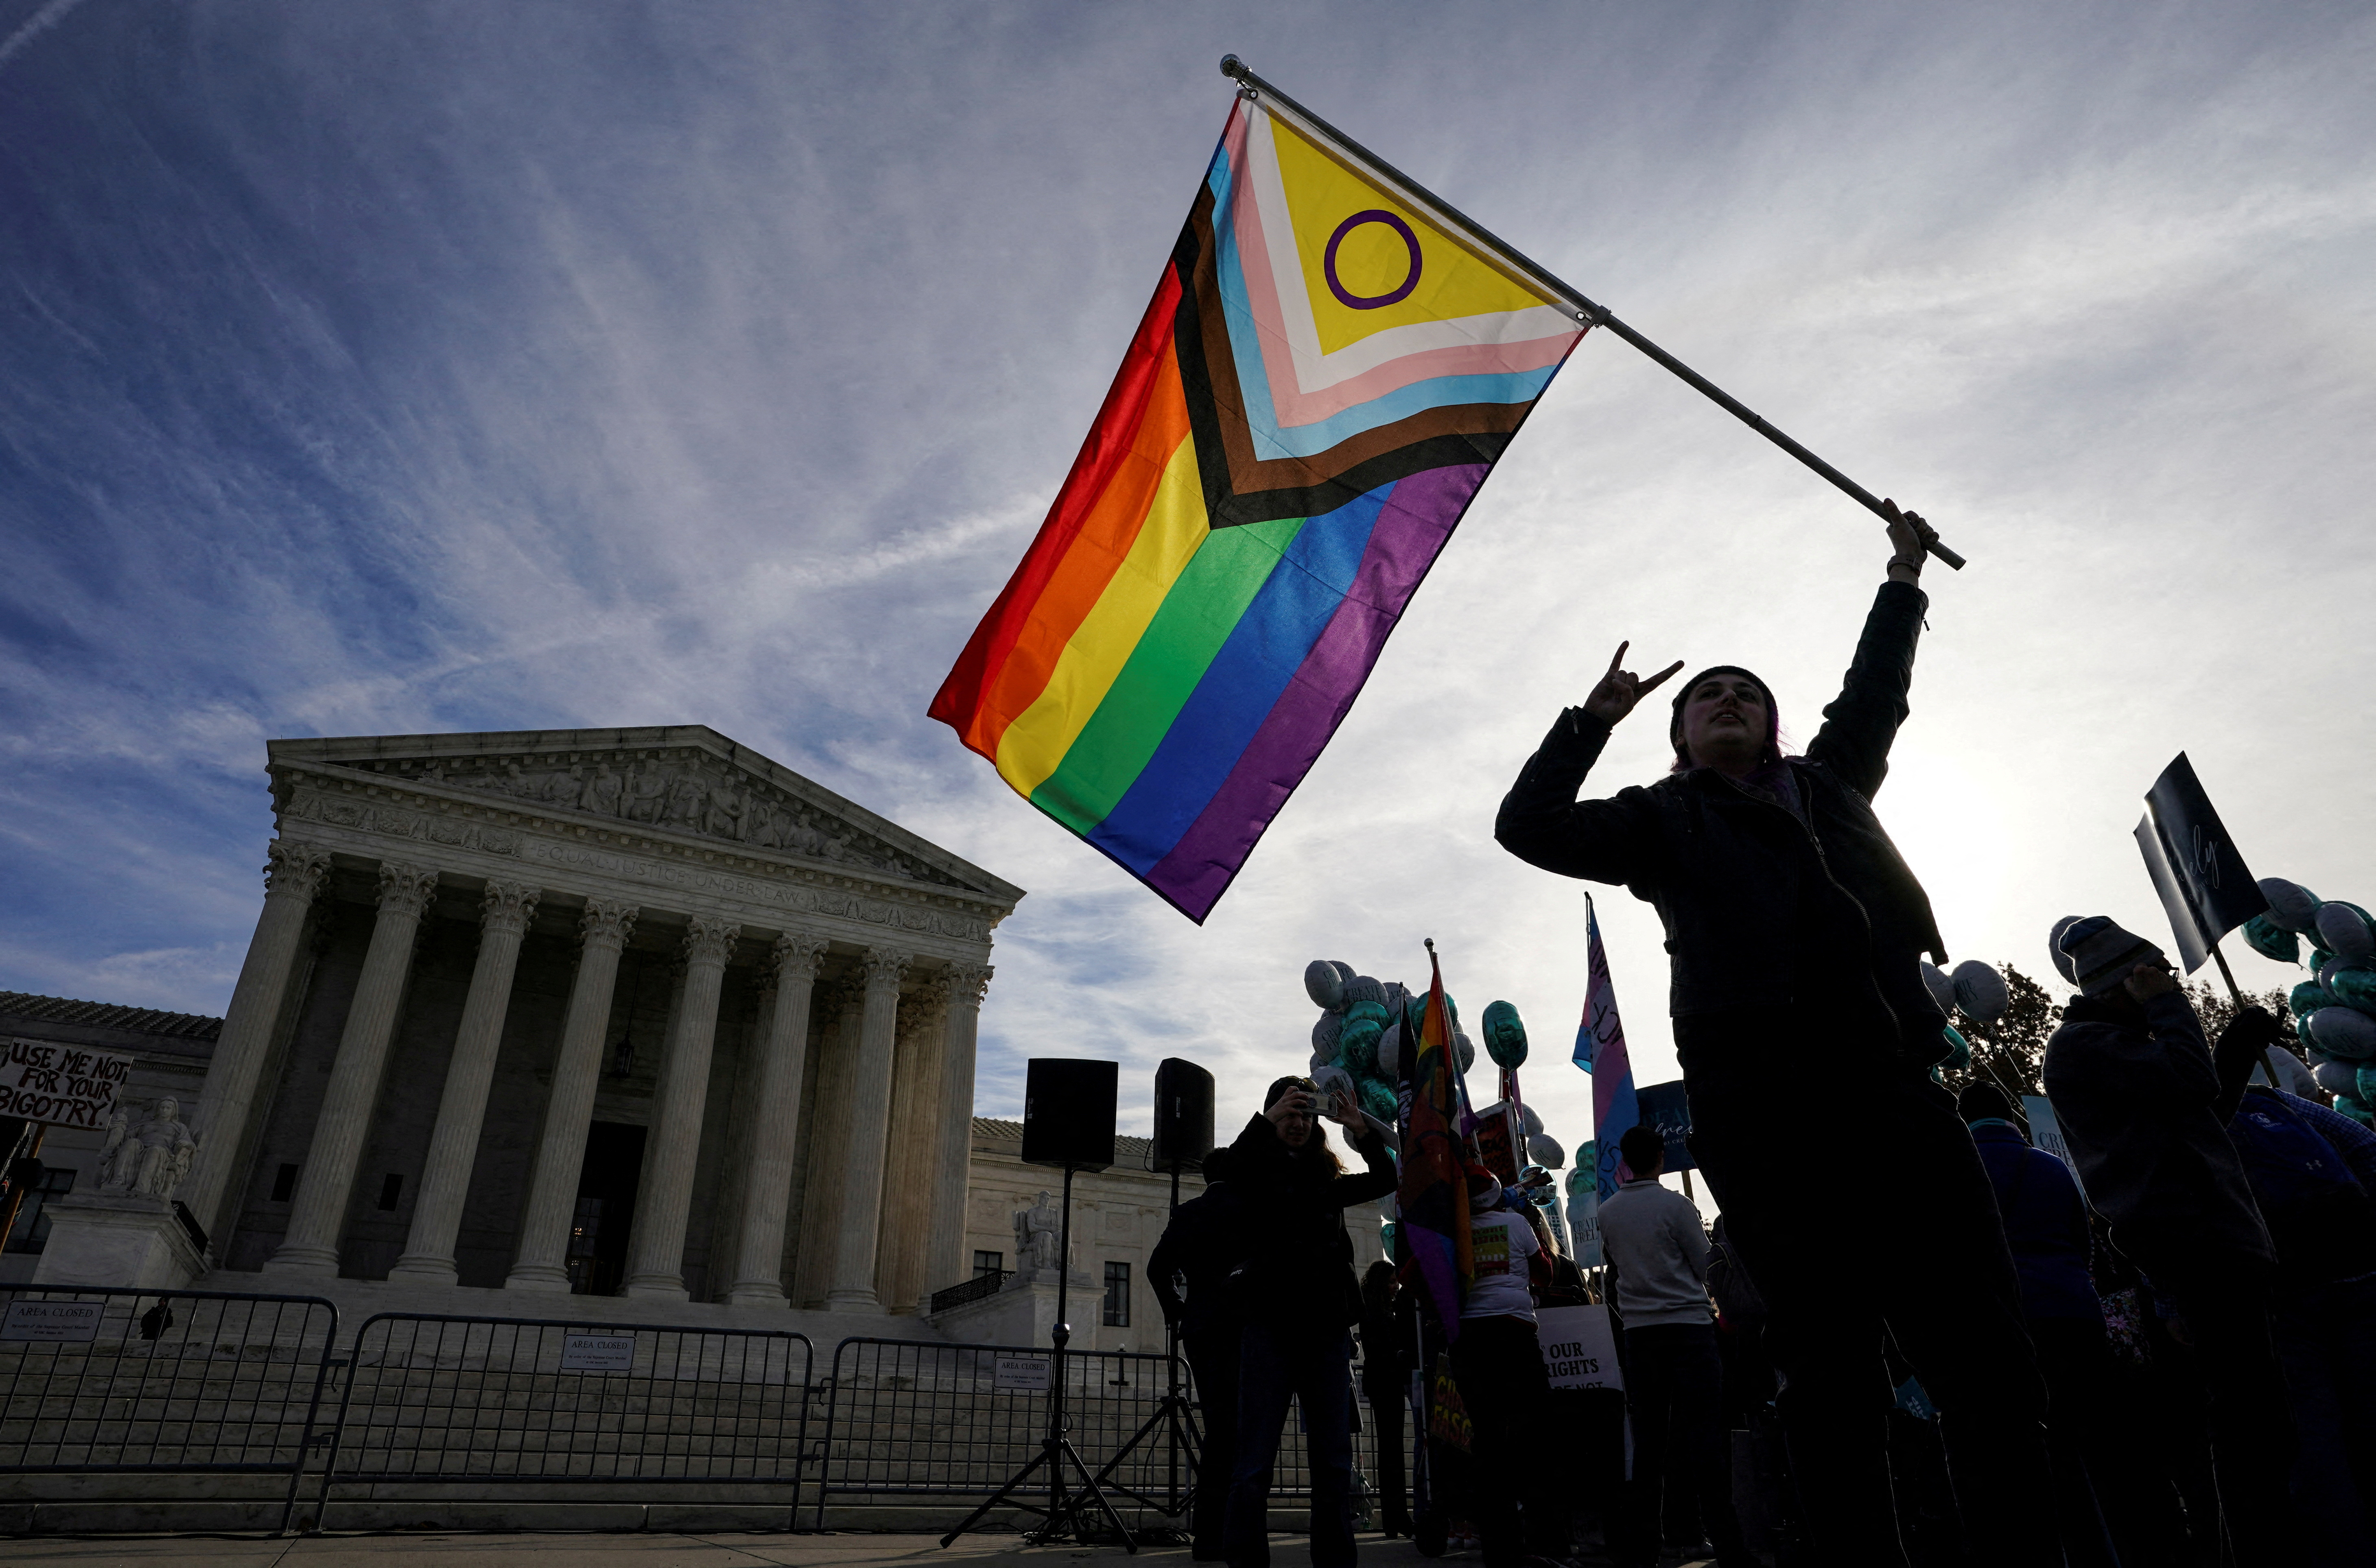 LGBT rights yield to religious interests at US Supreme Court Reuters photo